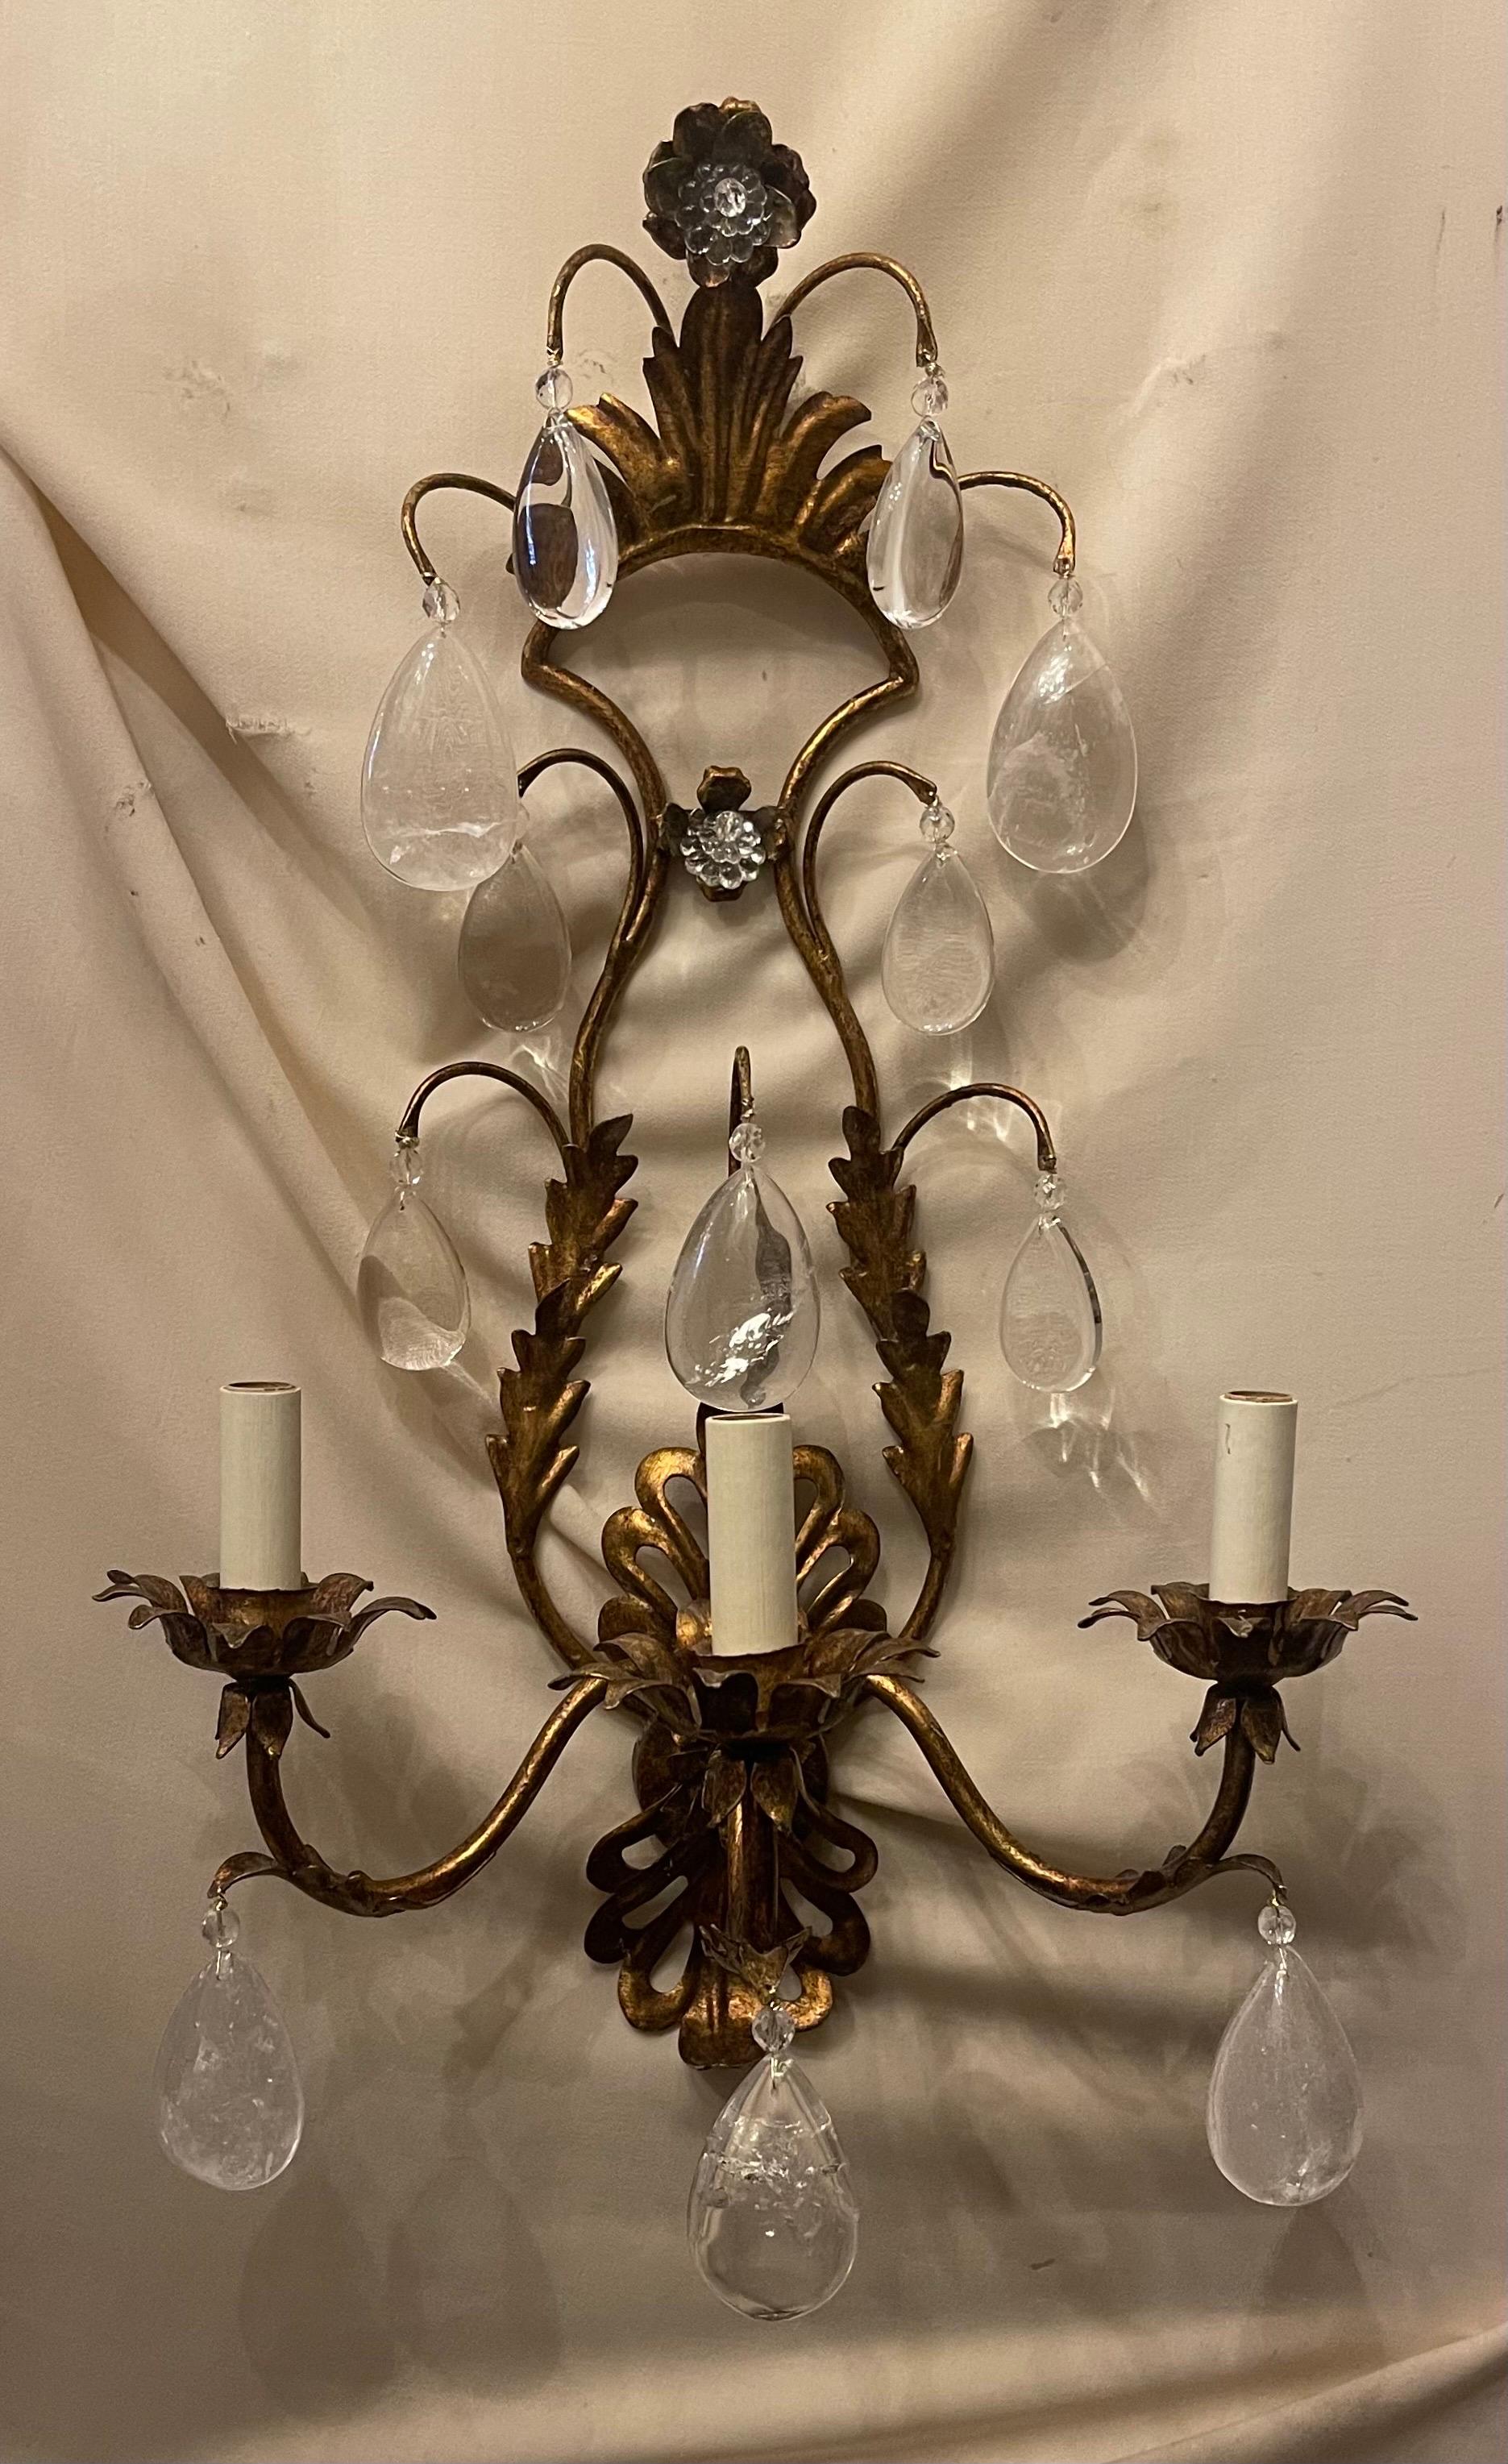 A wonderful two pairs of large Maison Baguès style rock crystal / crystal drop gold gilt tole filigree sconces by Vaughan designs with UL listing, ready to install with mounting hardware.

*Each pair sold separately
we have two pairs available